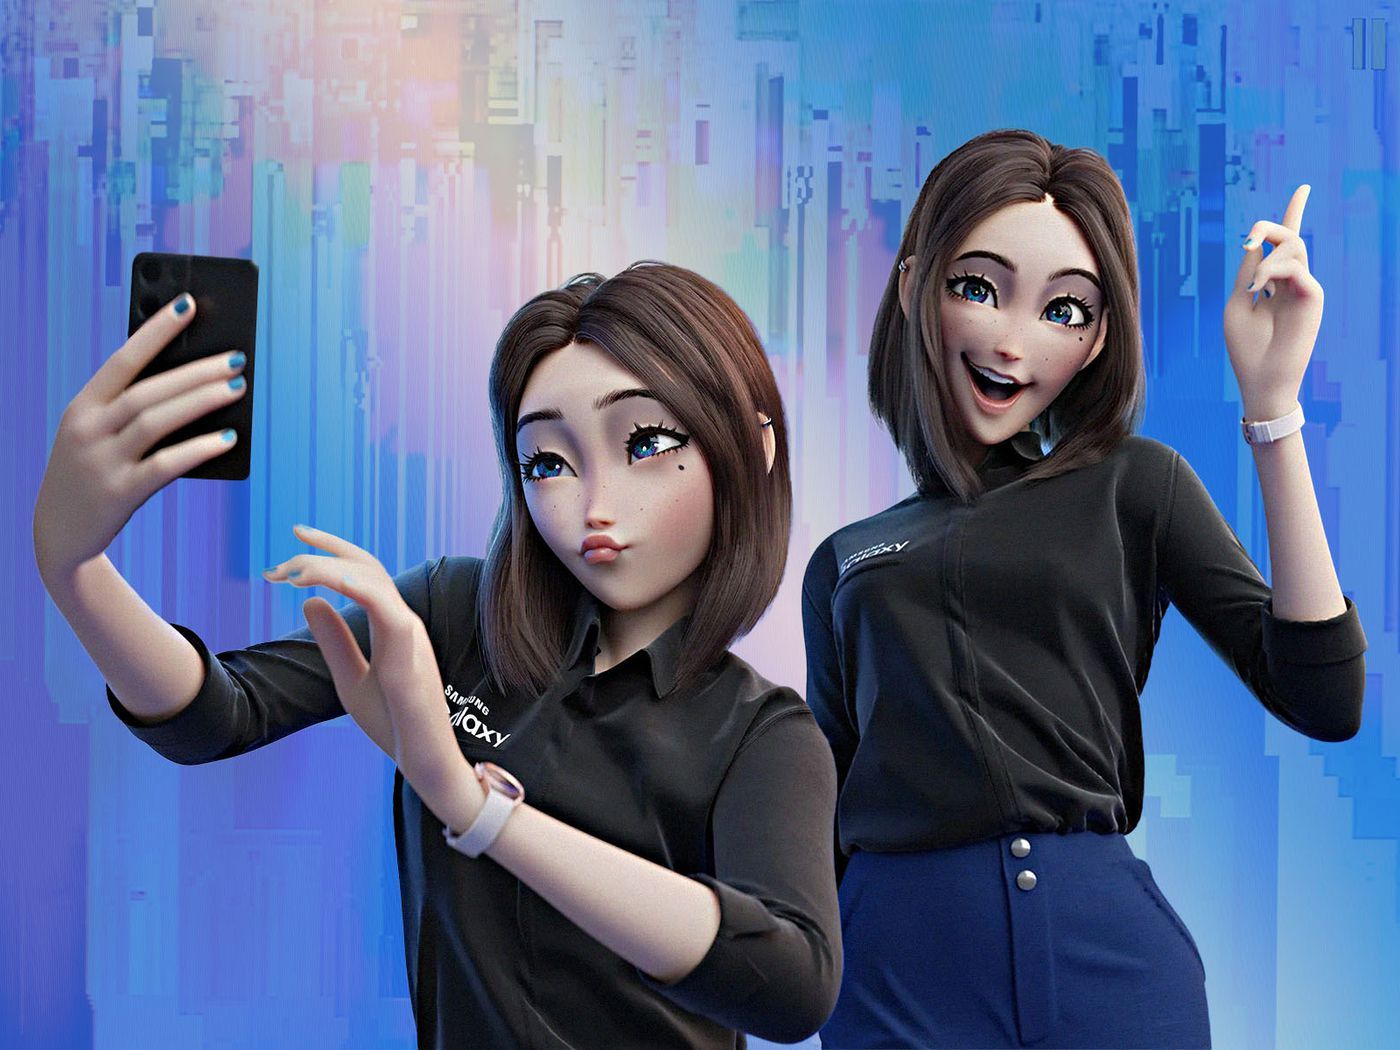 Who is Samantha Samsung, the currently popular online character?